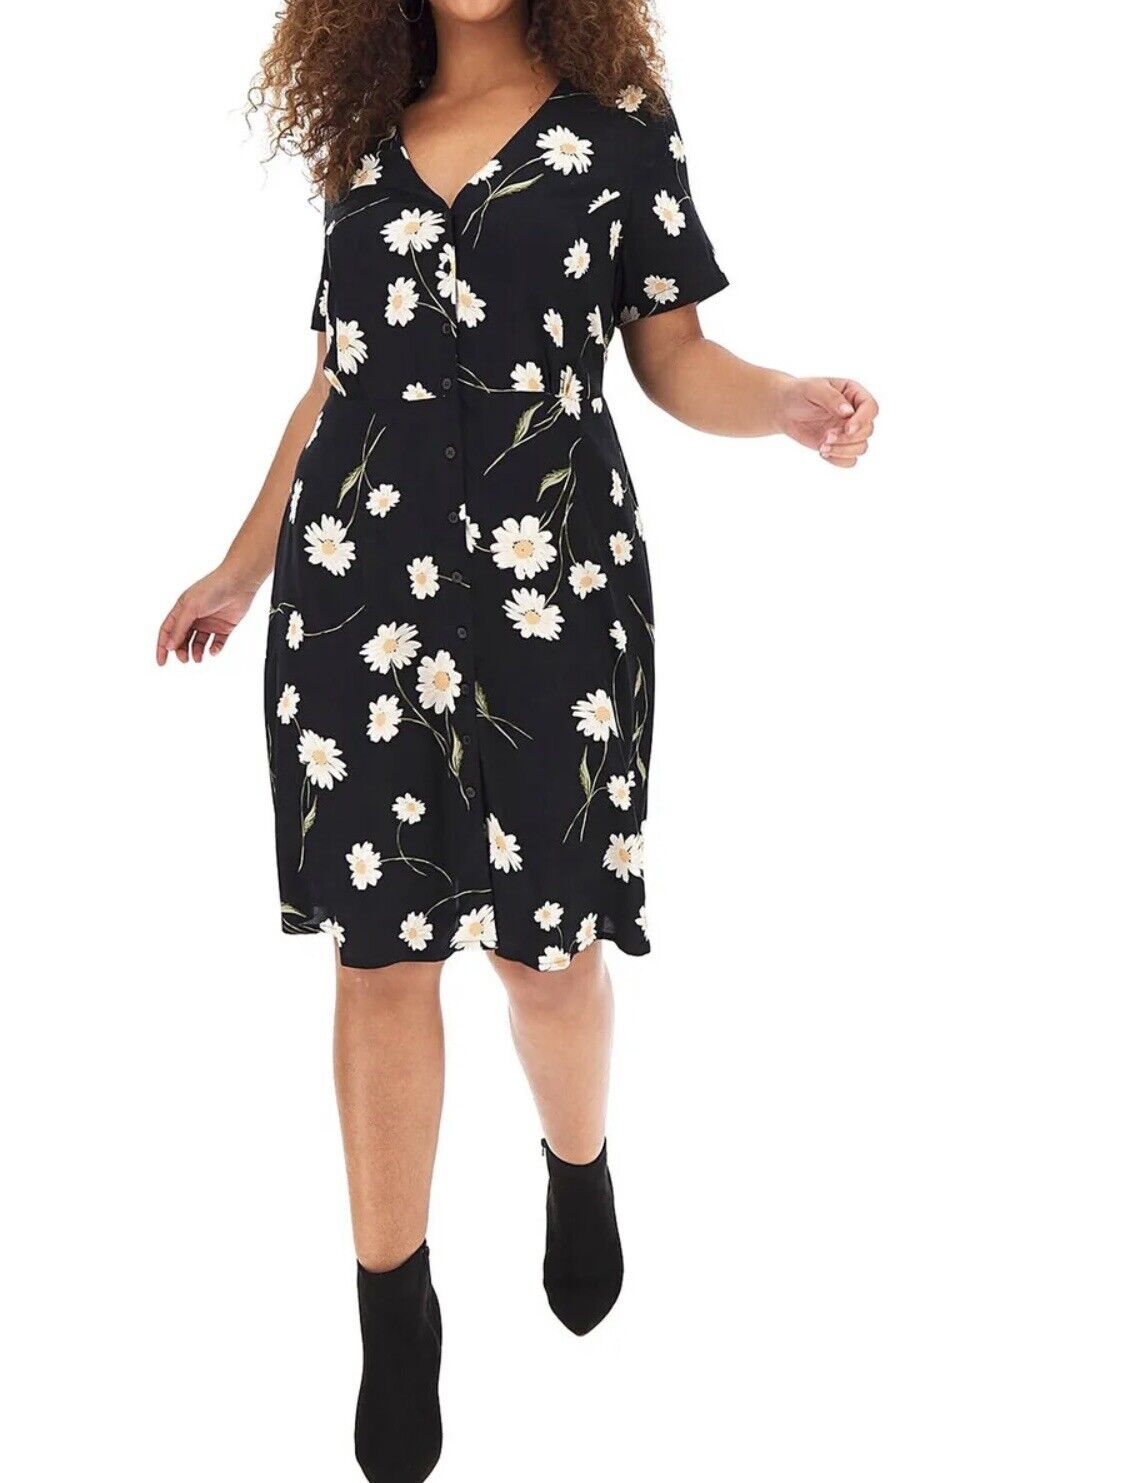 Simply Be Black Floral Daisy Shift Tea Dress in Sizes 14 or 24